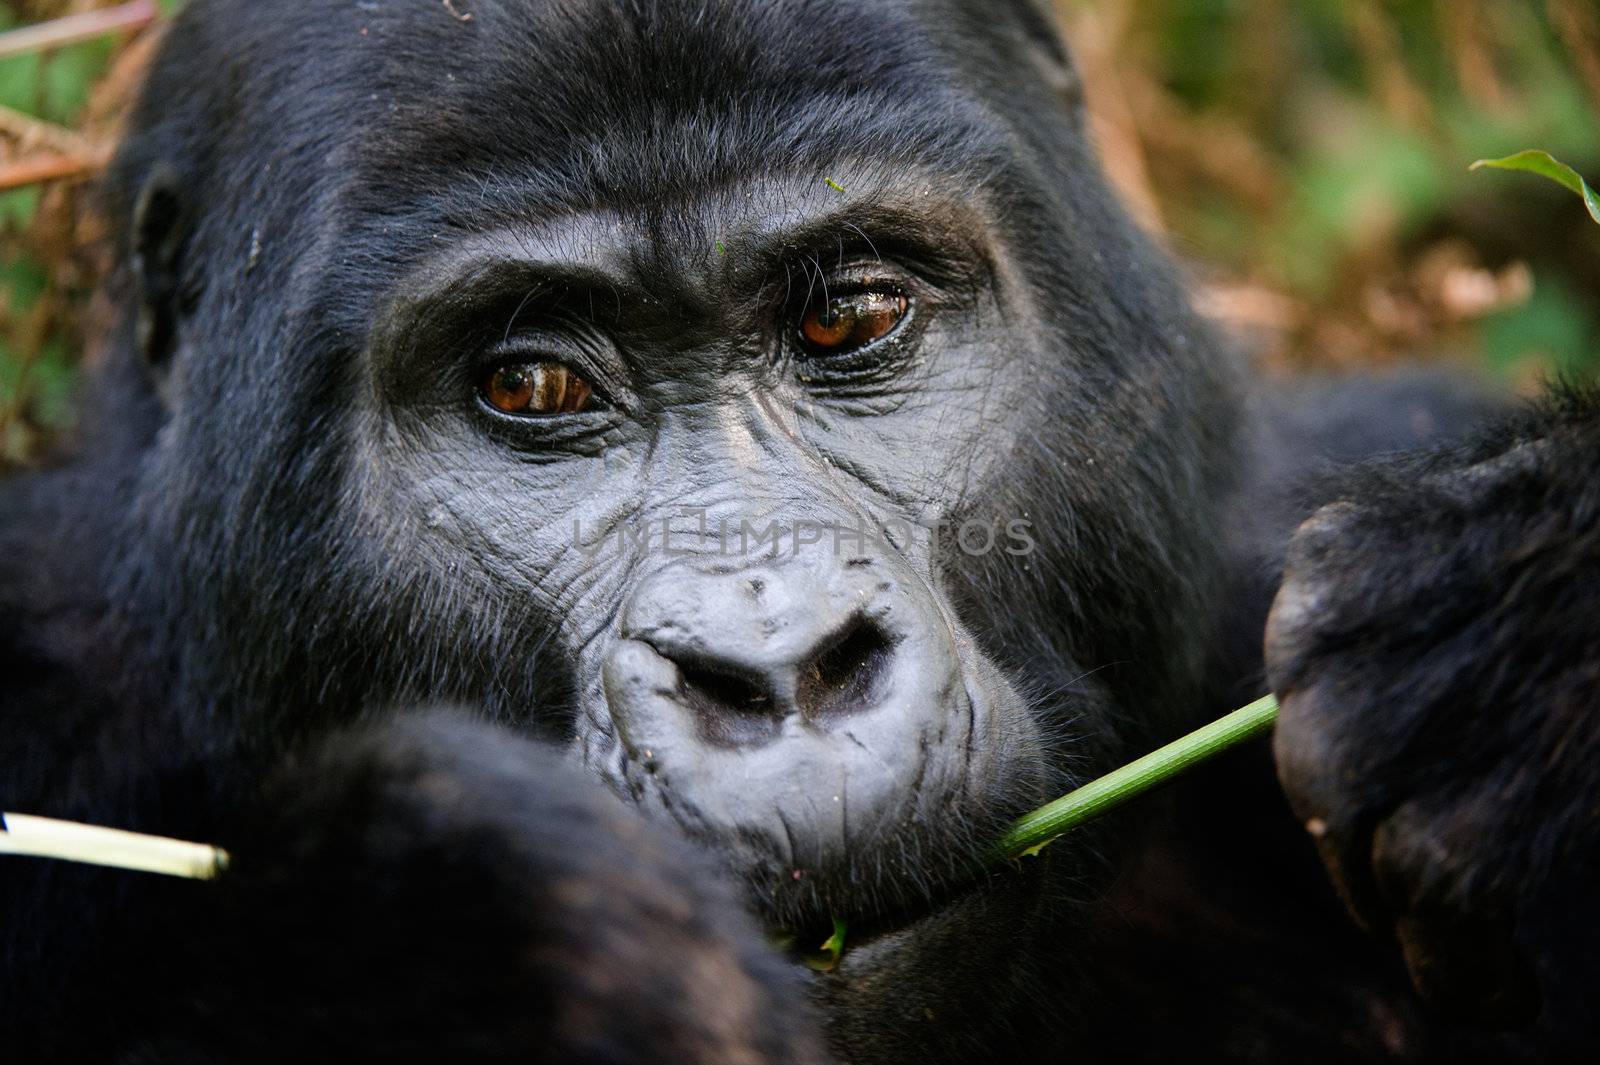 Gorillas are the largest of the living primates. They are ground-dwelling and predominantly herbivorous. They inhabit the forests of central Africa. Gorillas are divided into two species and (still under debate as of 2008) either four or five subspecies.